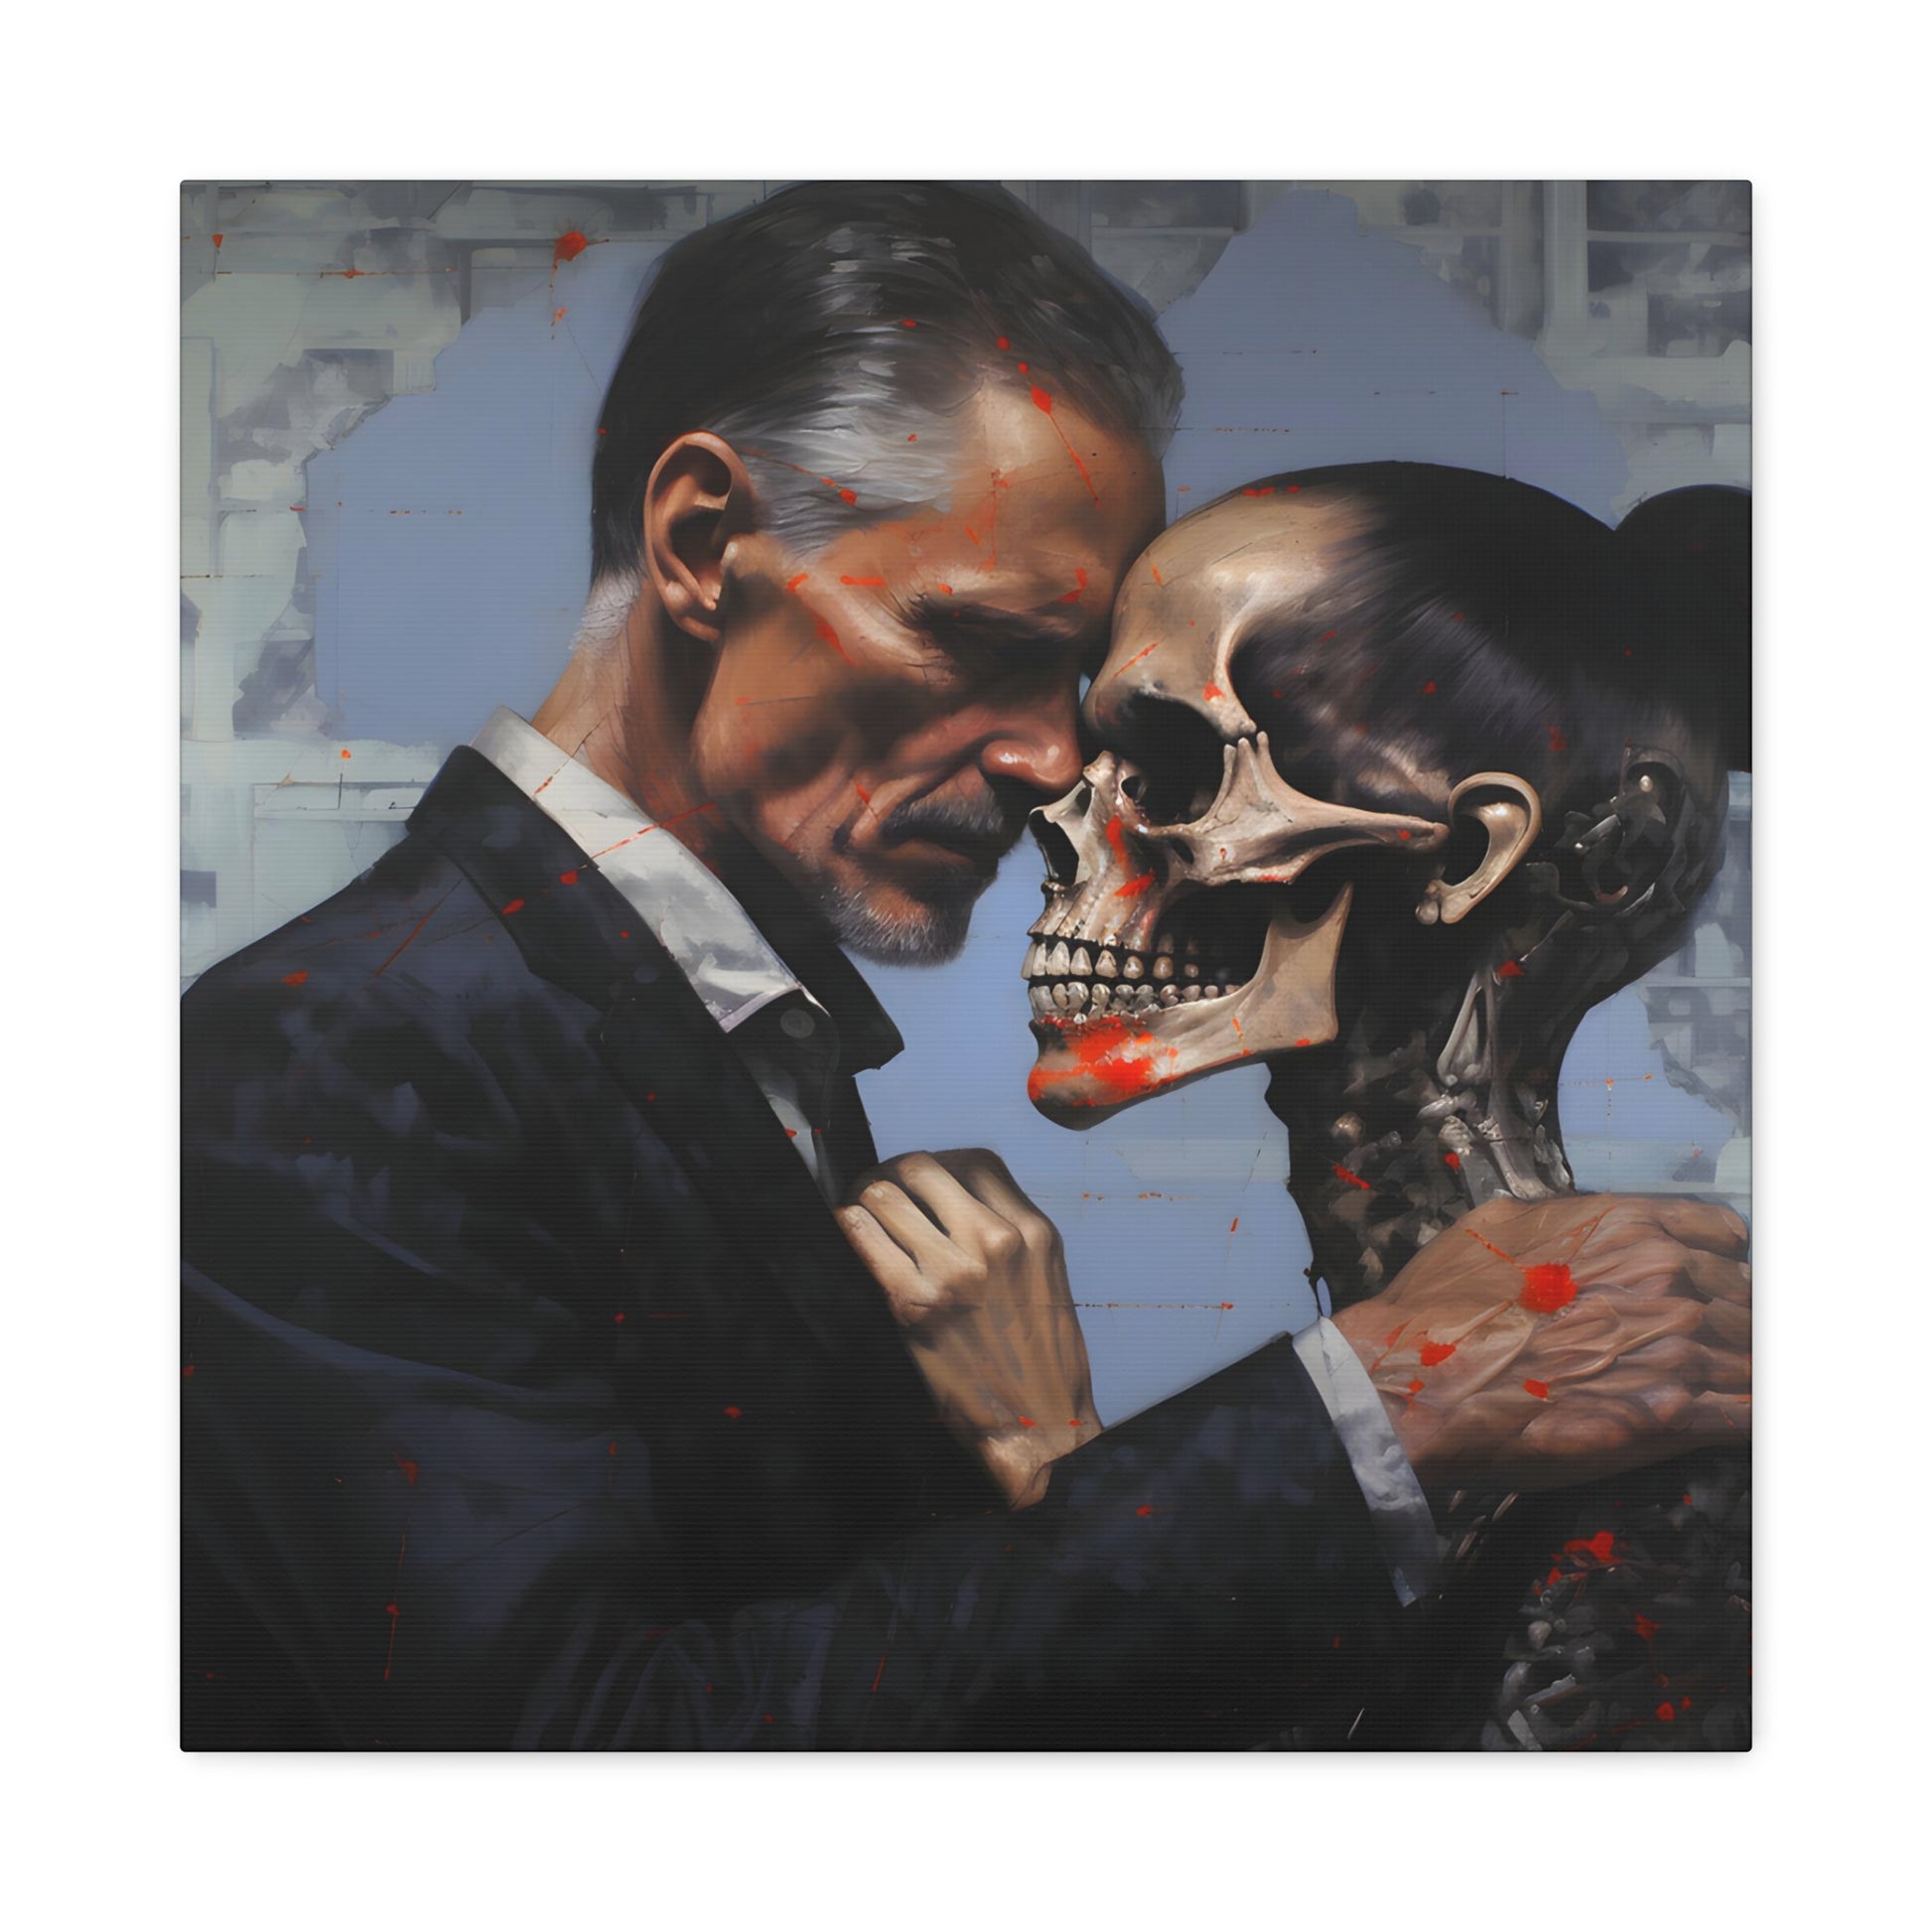 Embrace of Mortality', a hyperrealist painting depicting the haunting juxtaposition of love and death, offering a visceral reminder of human fragility, inspired by vanitas art traditions with a modern twist.